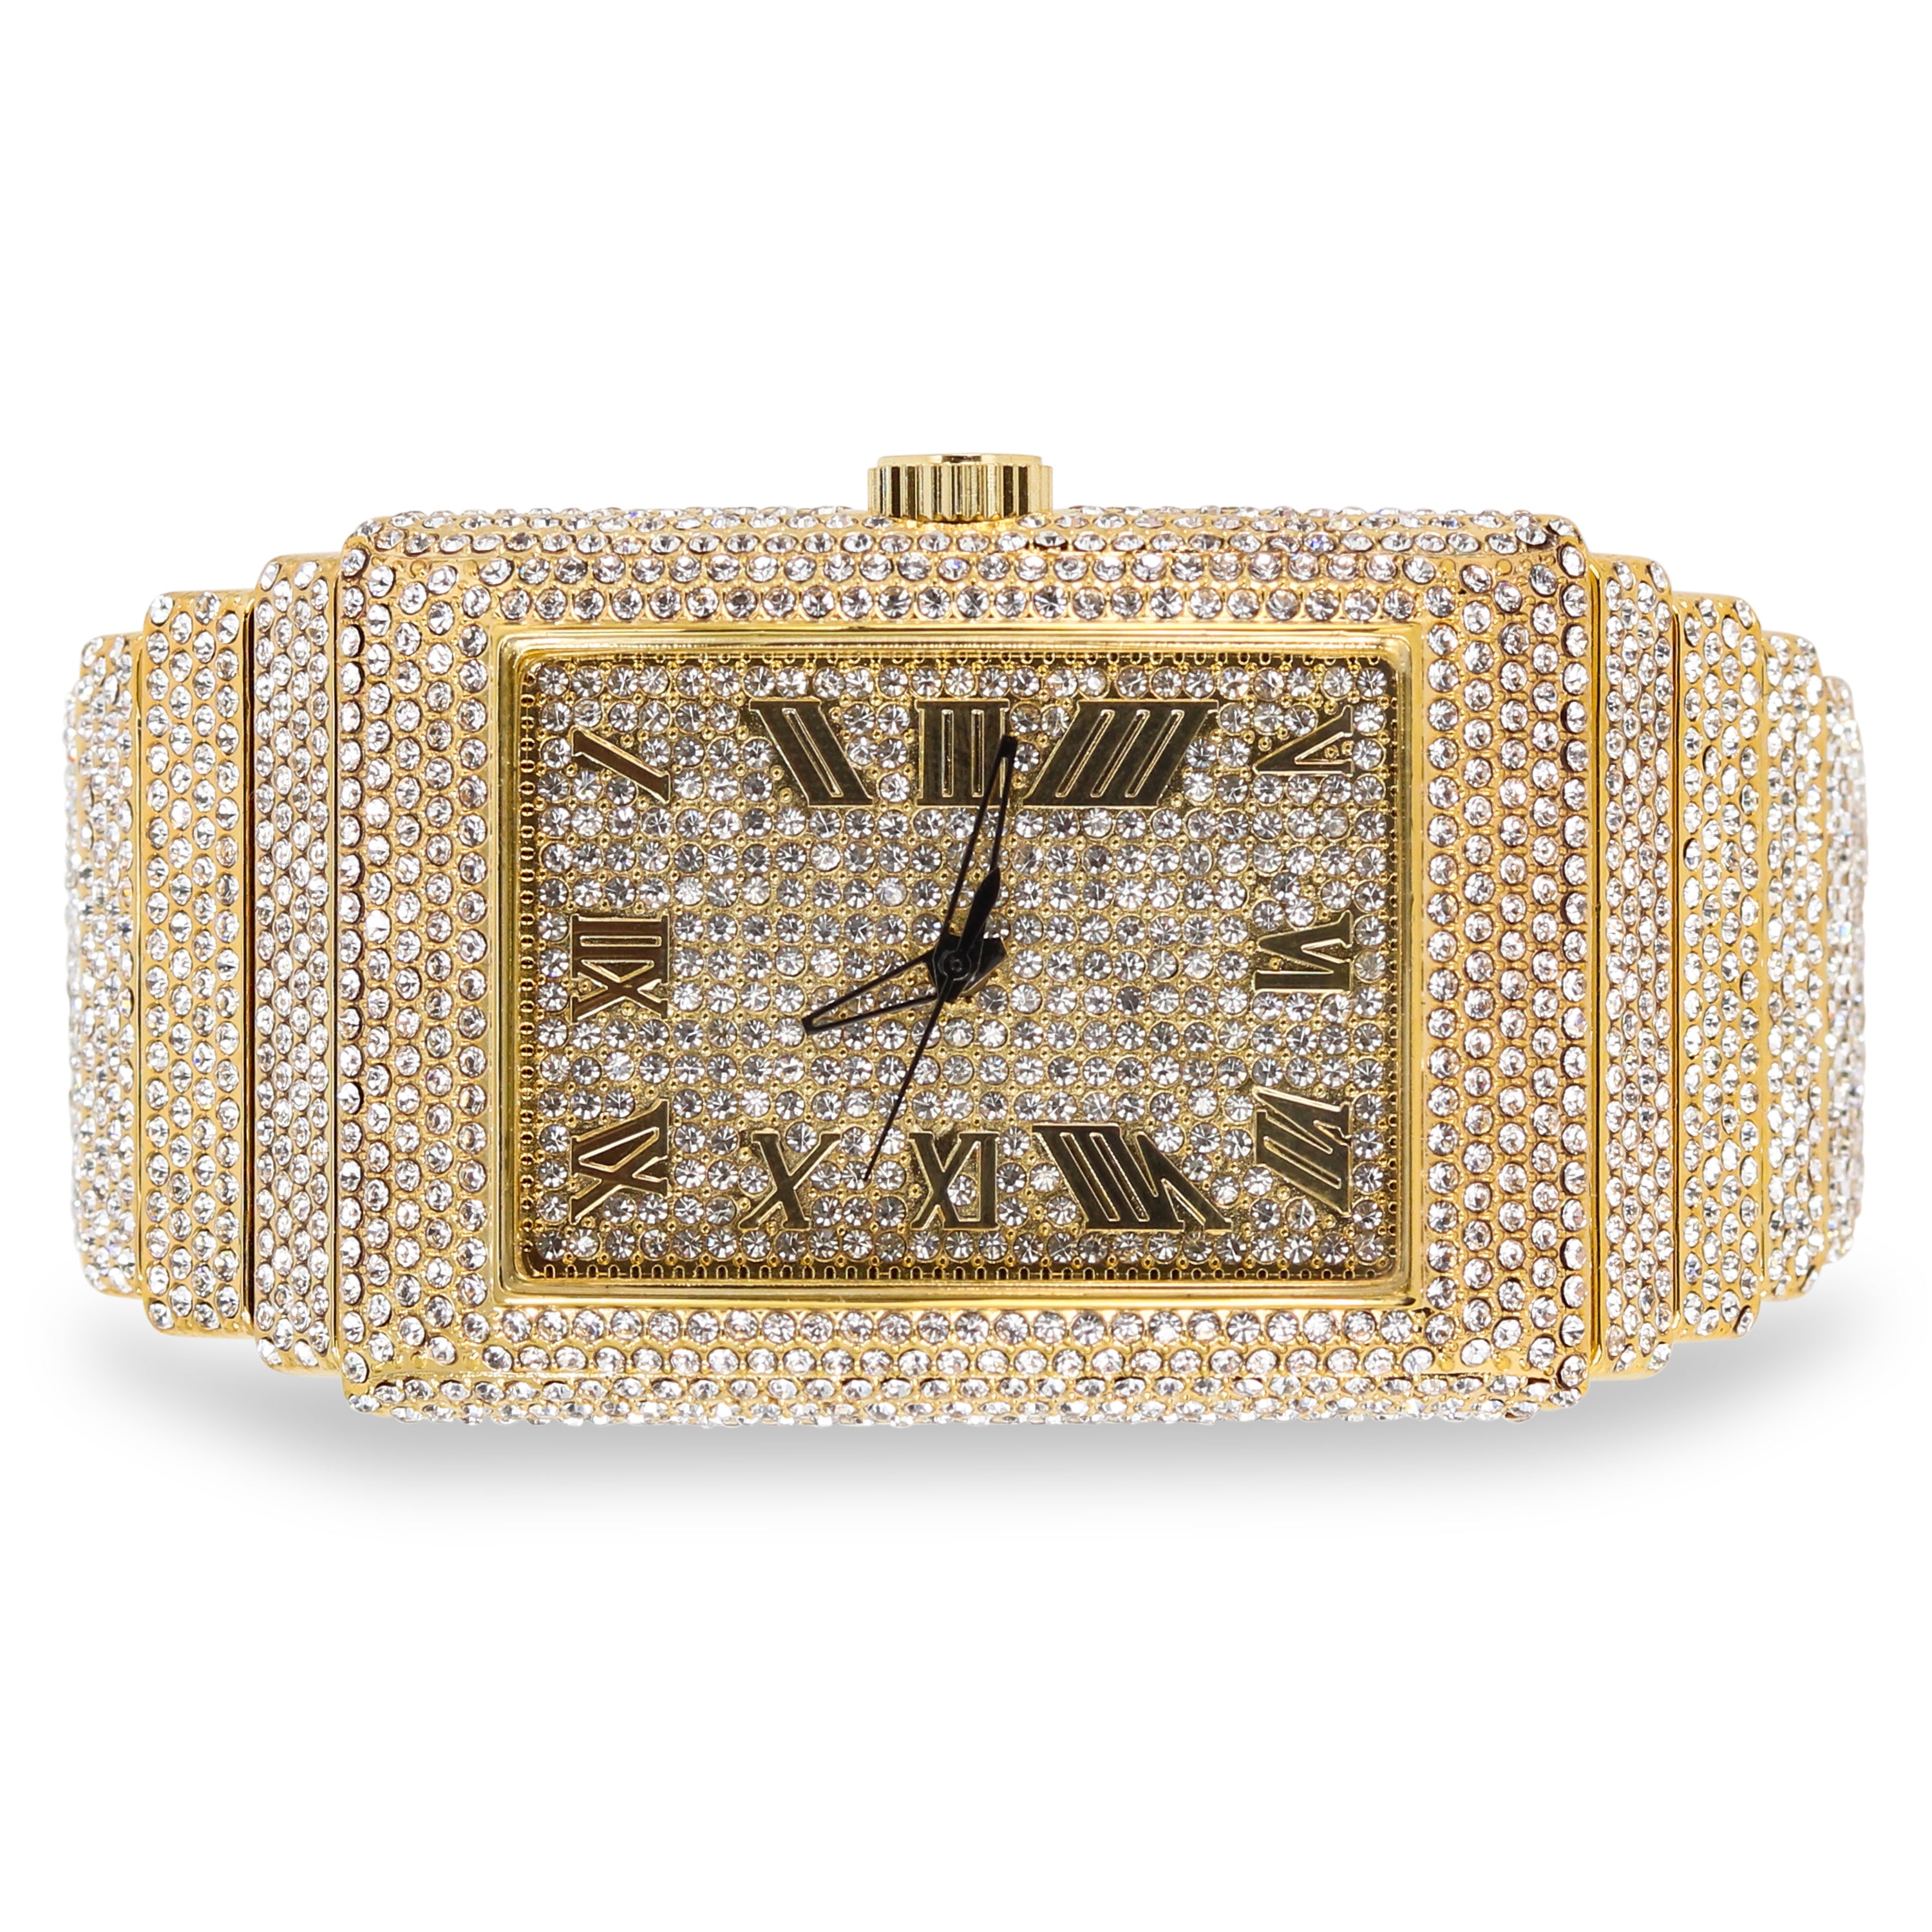 Men's Square Chandelier Watch 40mm Gold - Fully Iced Band